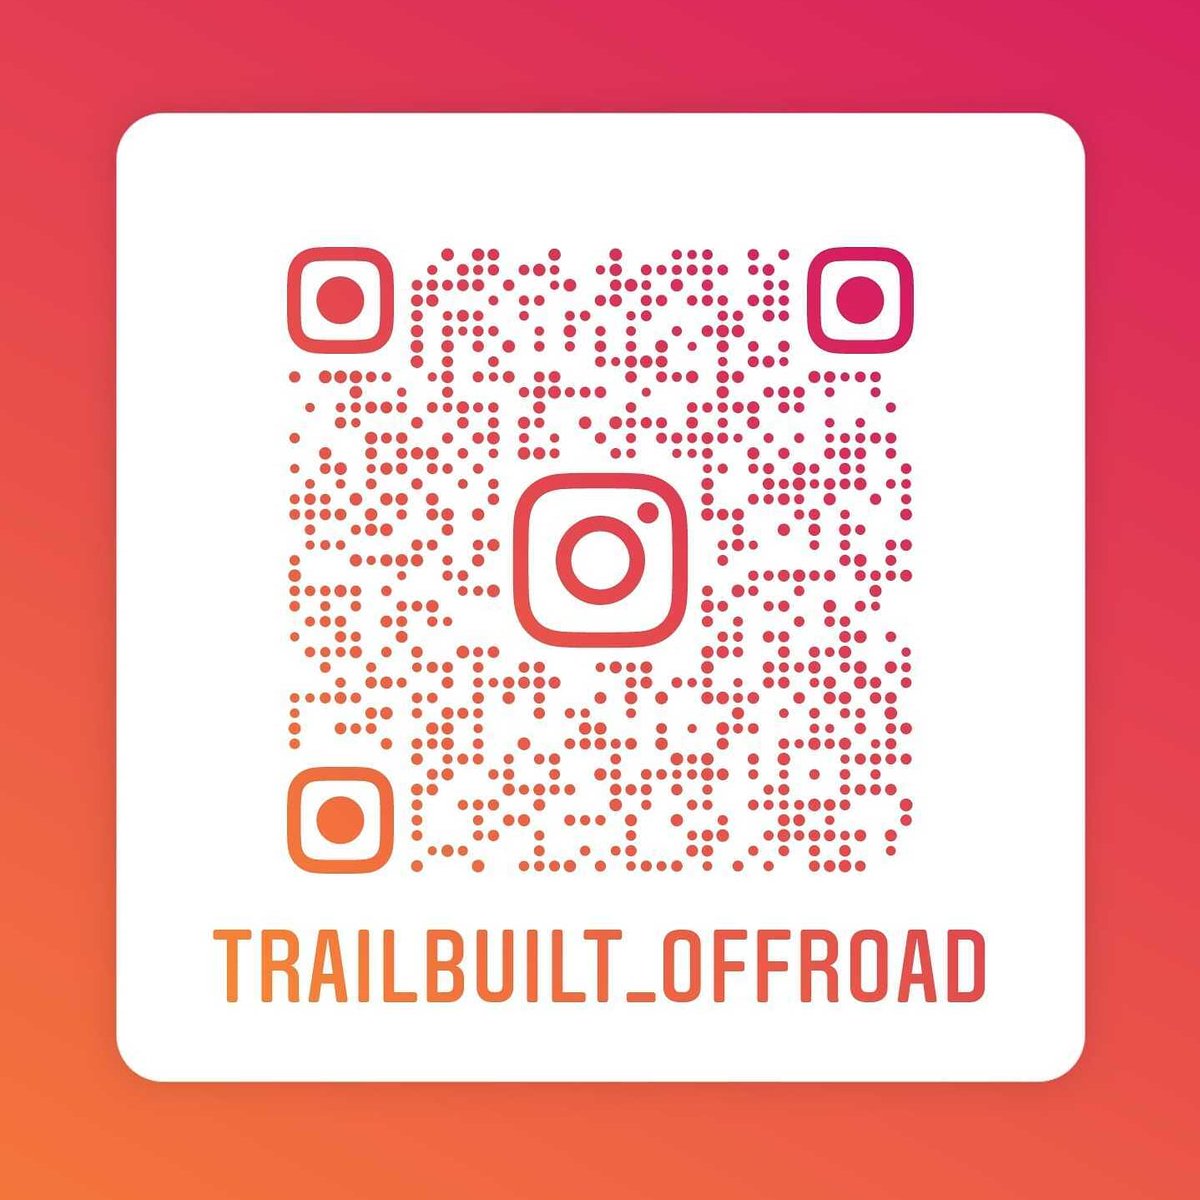 The other day our IG account was hacked by someone and held for ransom! We need all the help we can get reboosting our followers! Help us out
.
.
.
.
.
#trailbuilt #trailbuiltoffroad #offroadnation #builtnotbought #4x4 #offroad #overland #jeeplife #jeepfamily